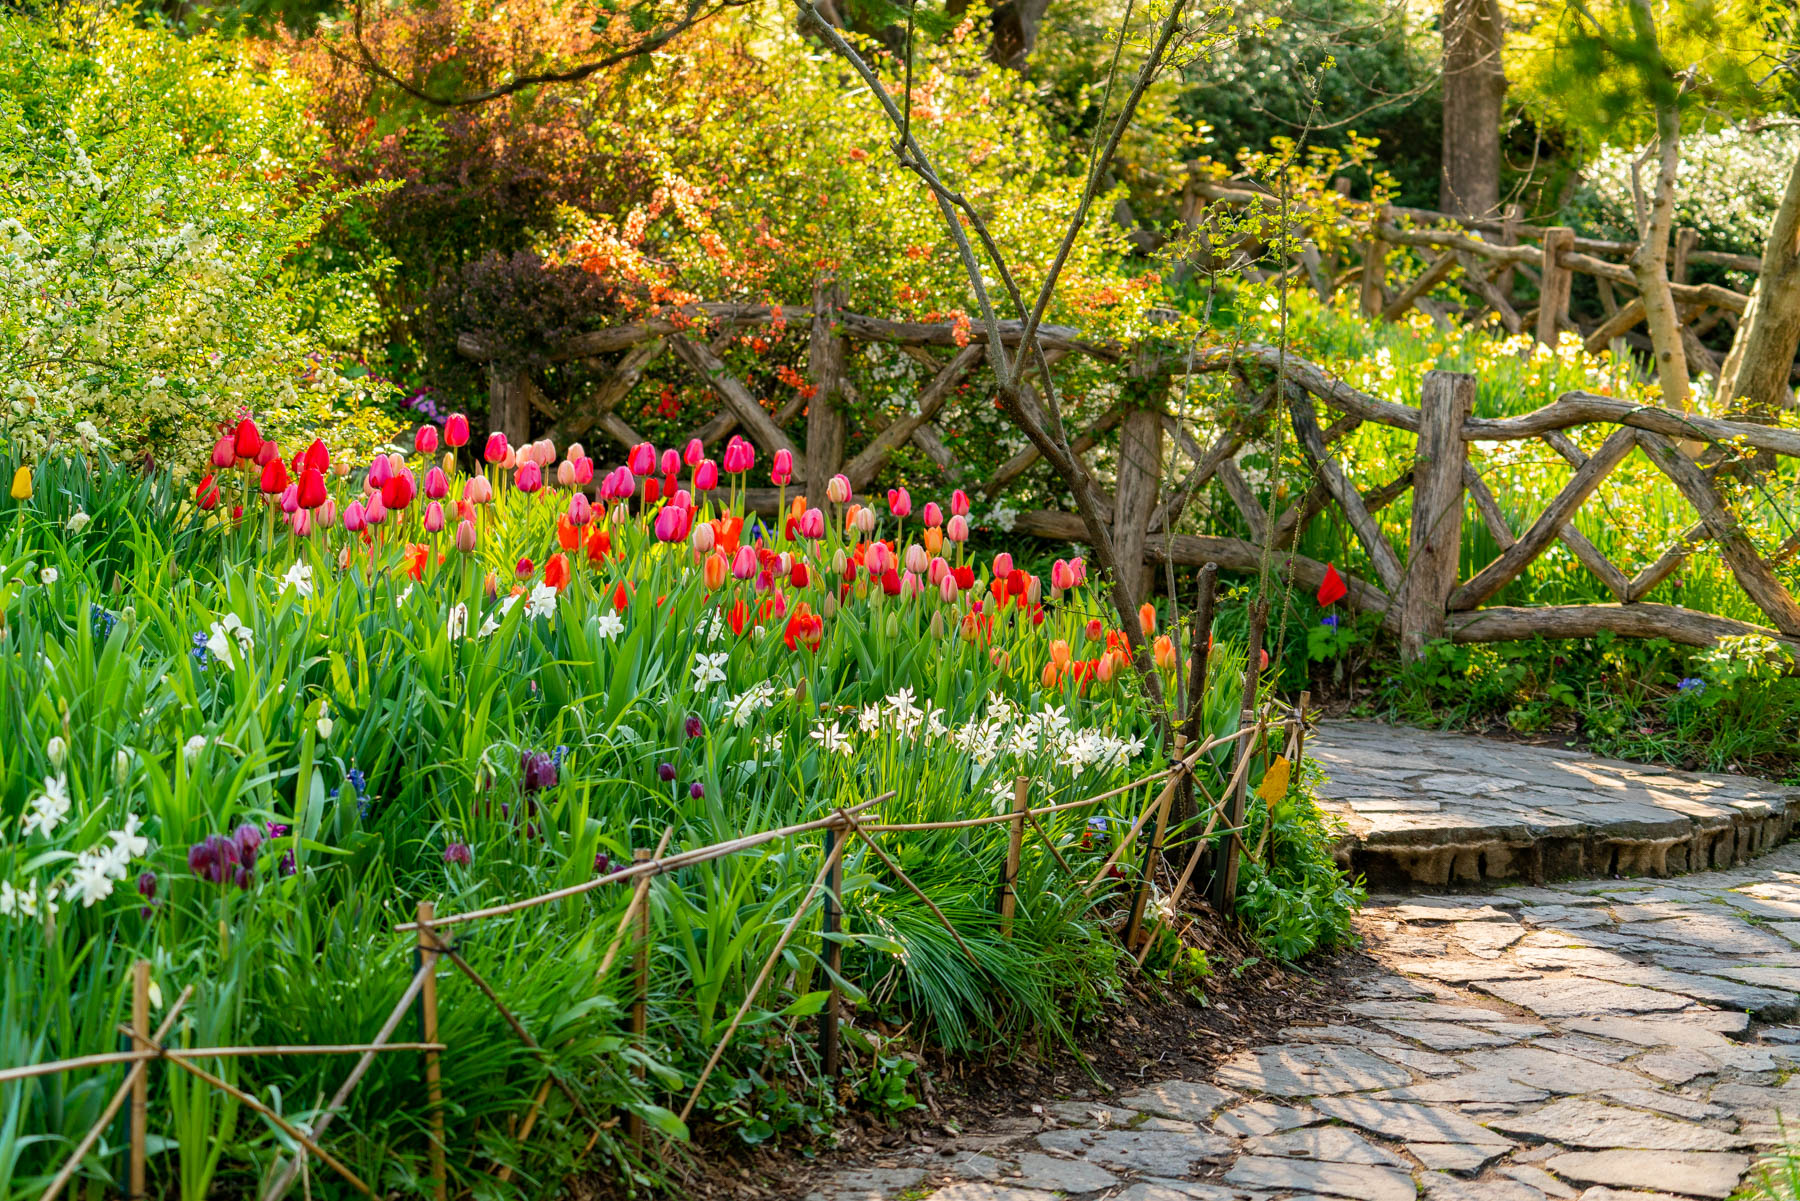 Where to find tulips in New York City
best photo spots in Central Park